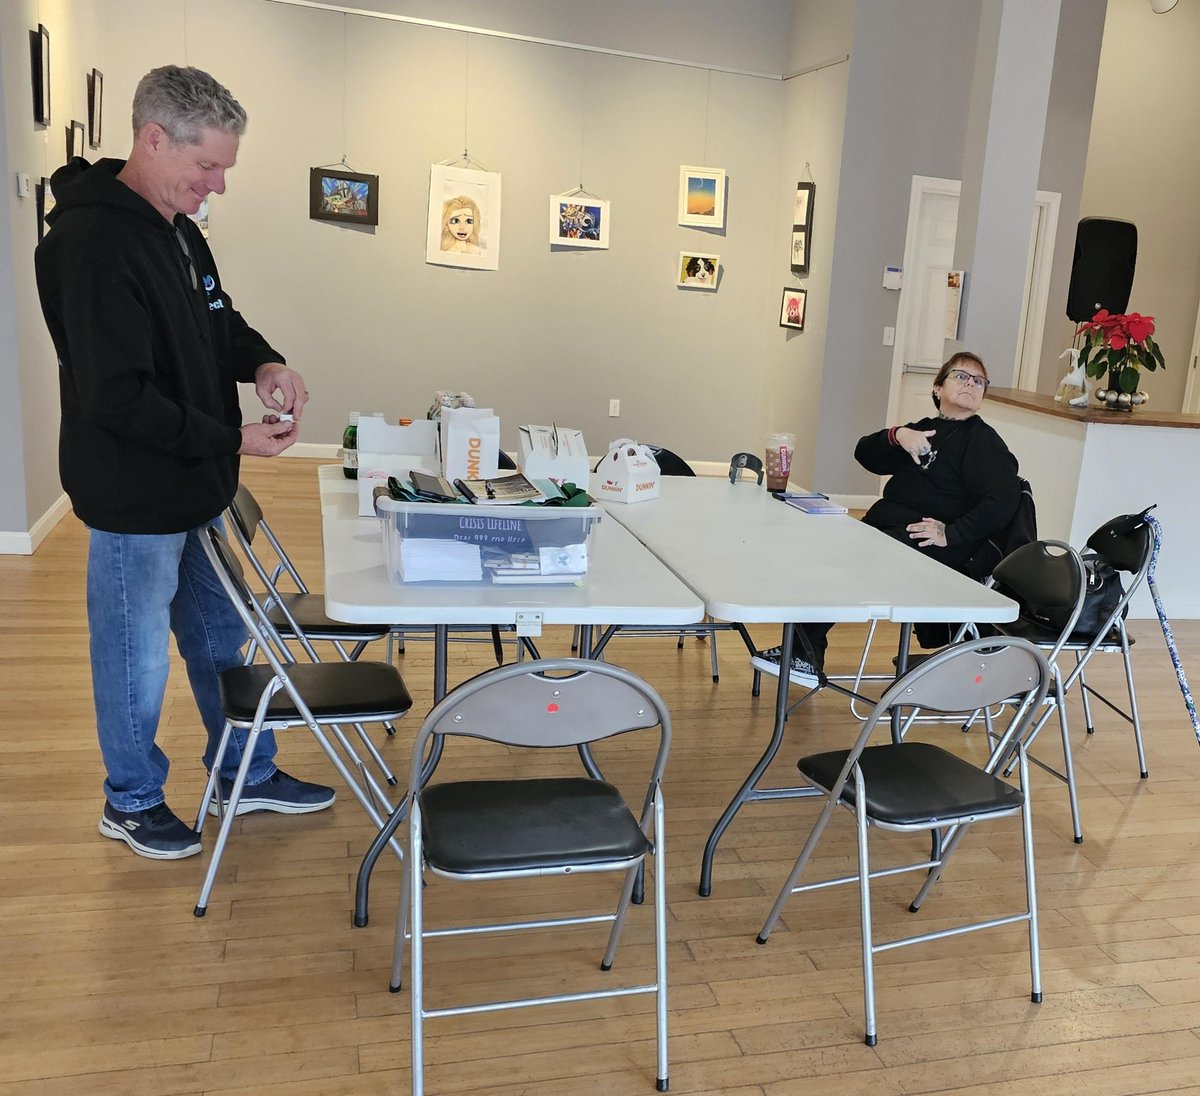 SUNDAY MAY 12, 10am-11am, Kitchen Table Convo #suicideloss #postvention peer2peer support. Trescott St. Gallery, TauntonMA hosted by The Kacie Palm Project. Grief&Loss do not just go away. Connect w/others